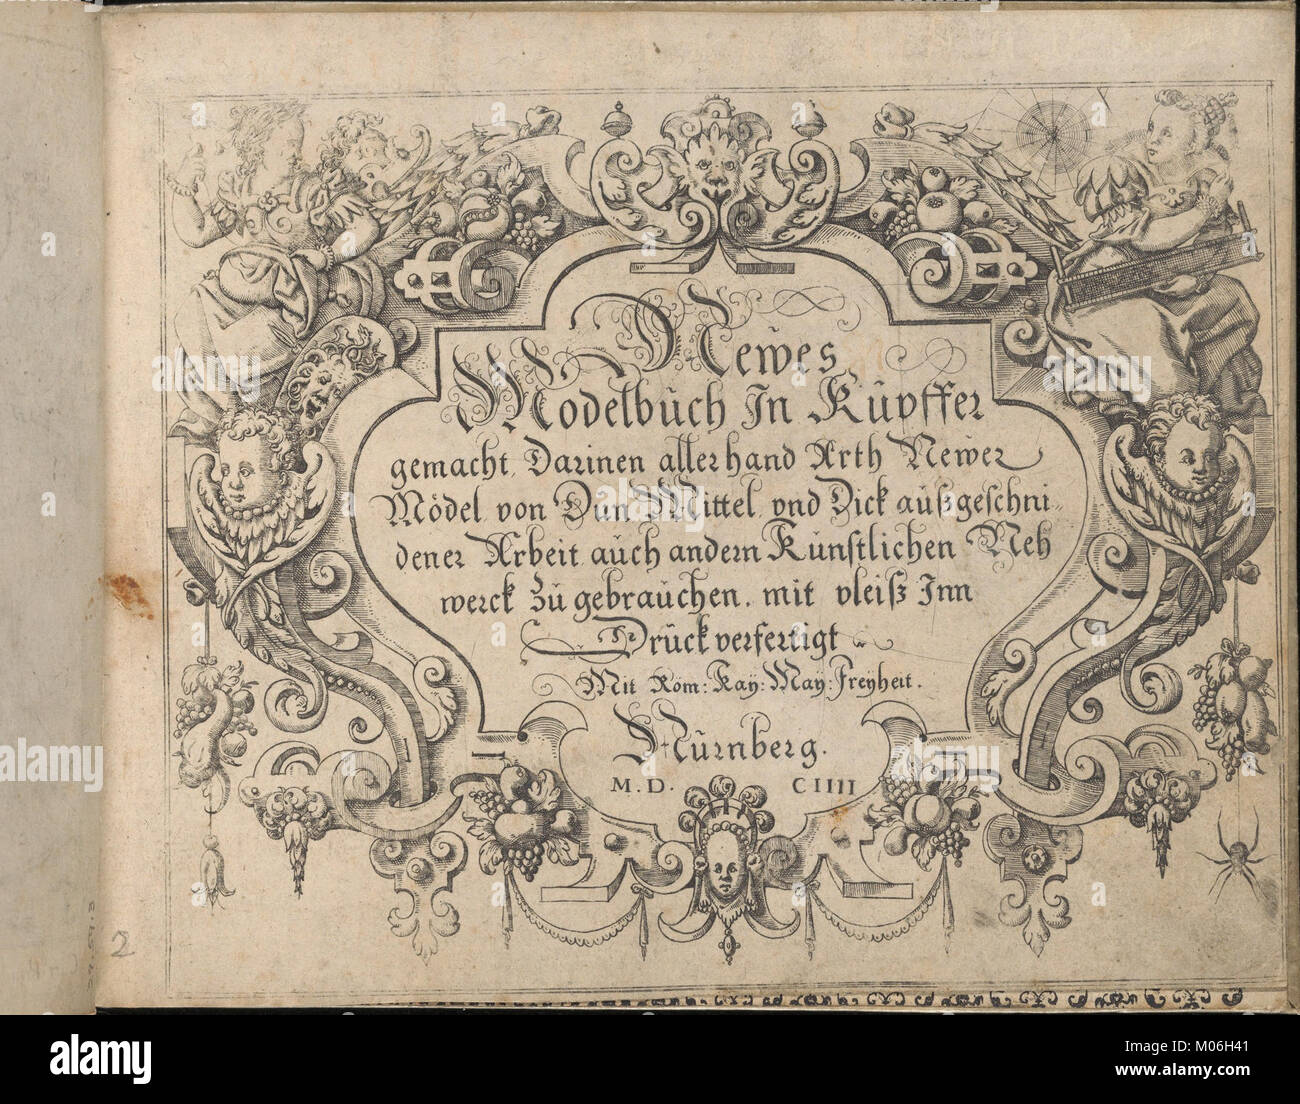 Newes Modelbuch in Kupffer (second title page, 2r) MET DP363789 Stock Photo